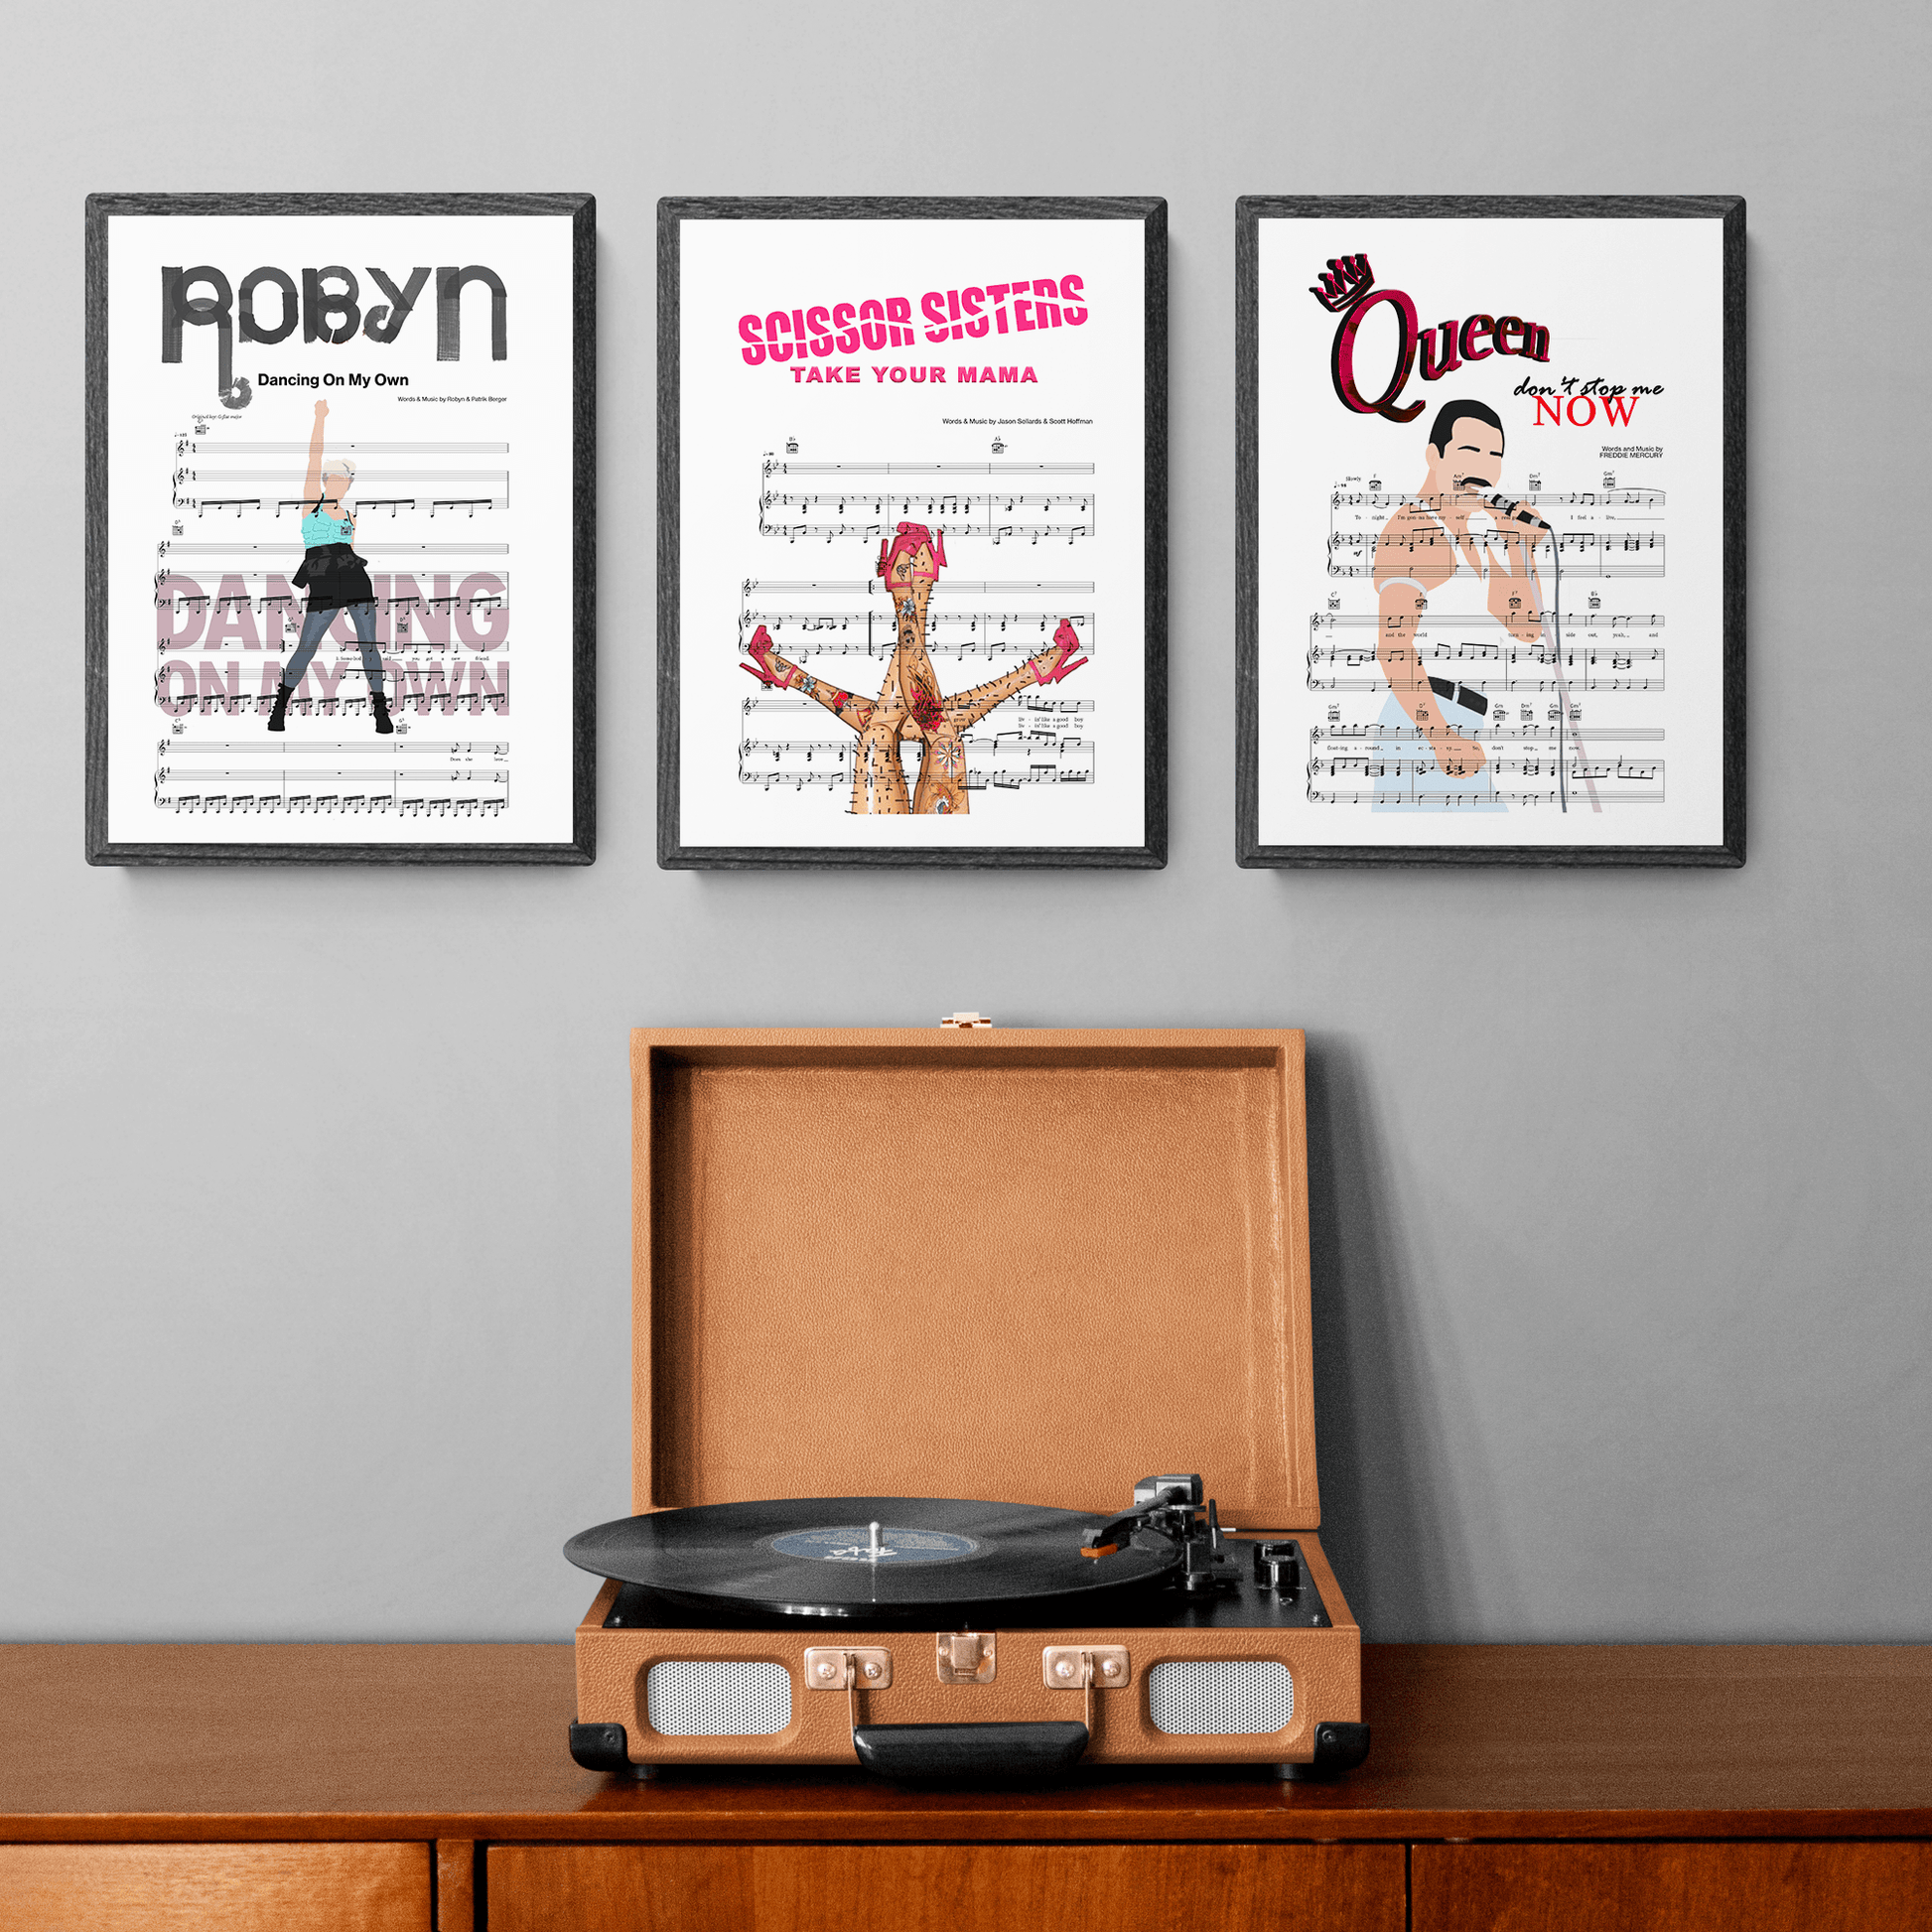 This song lyric poster of Queen's classic "Don’t Stop Me Now" captures the energy and feeling of the song in a unique, hand-crafted design. Printed on archival quality paper and guaranteed to last a lifetime, the poster makes a perfect addition to any home or office. Support the original artist and style your walls with music! A timeless piece of art that conveys a message of joy and positivity, while providing rich and enduring visual appeal.